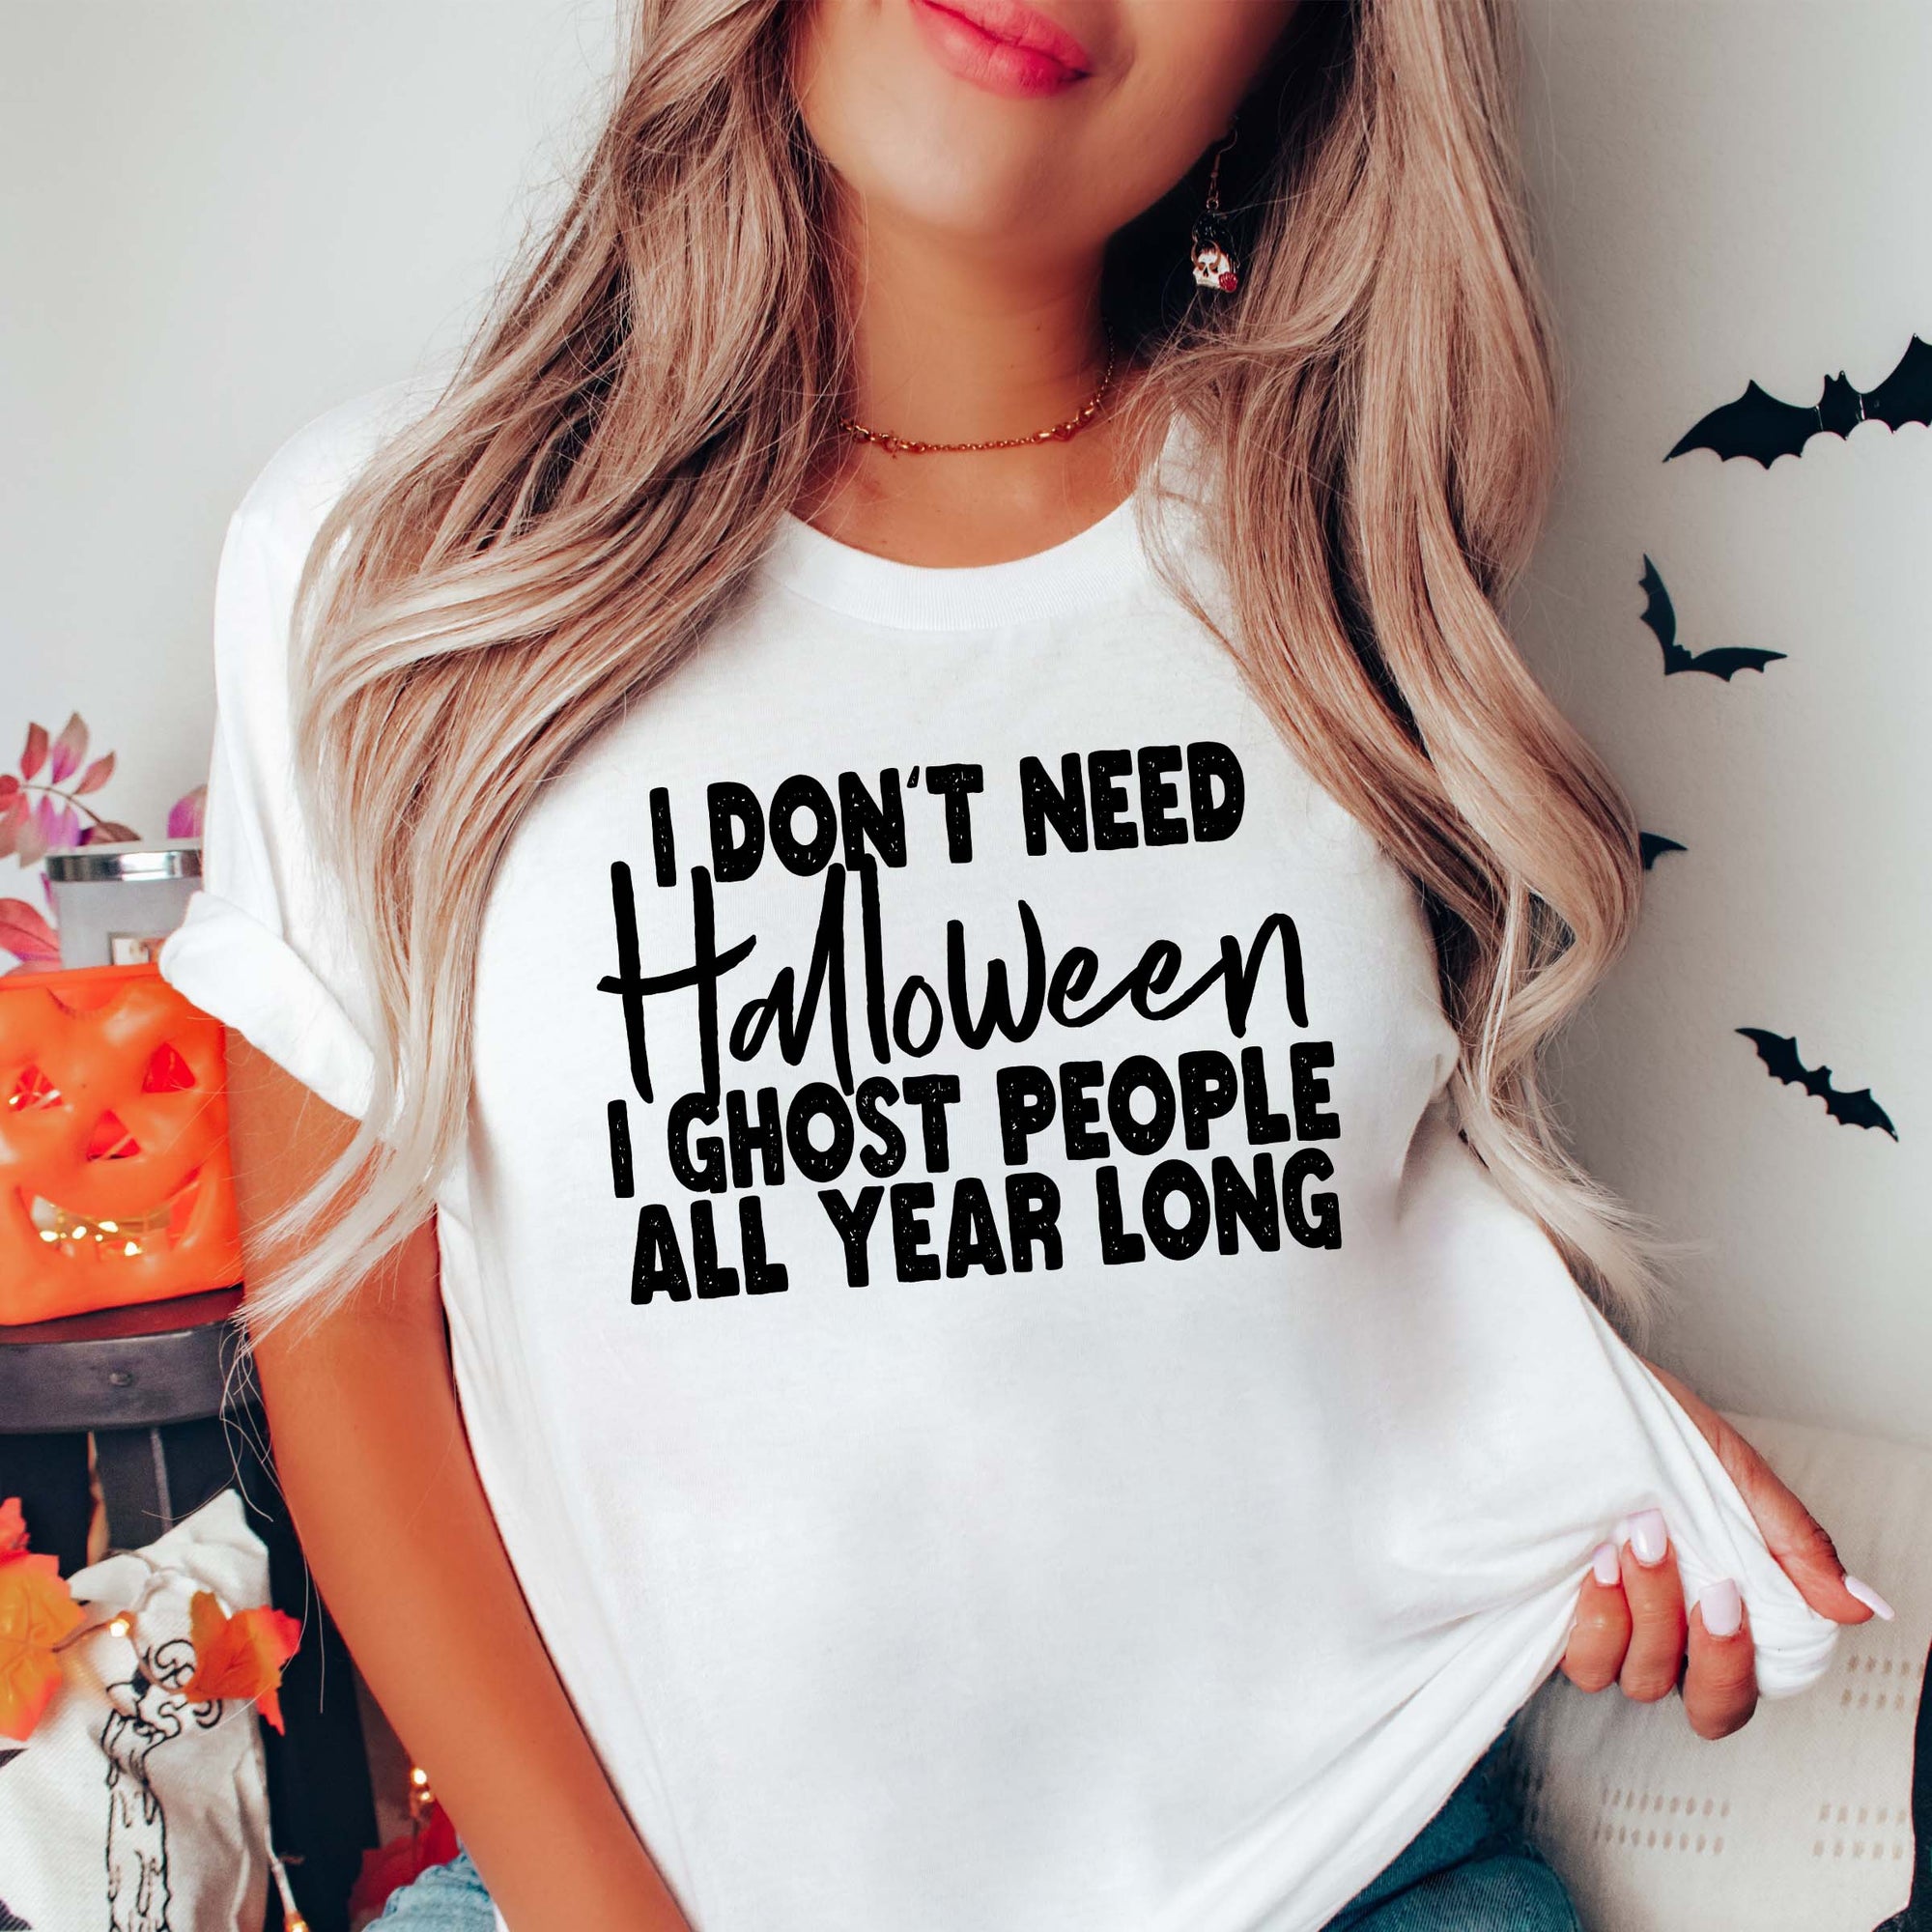 Ghost people all year long tee